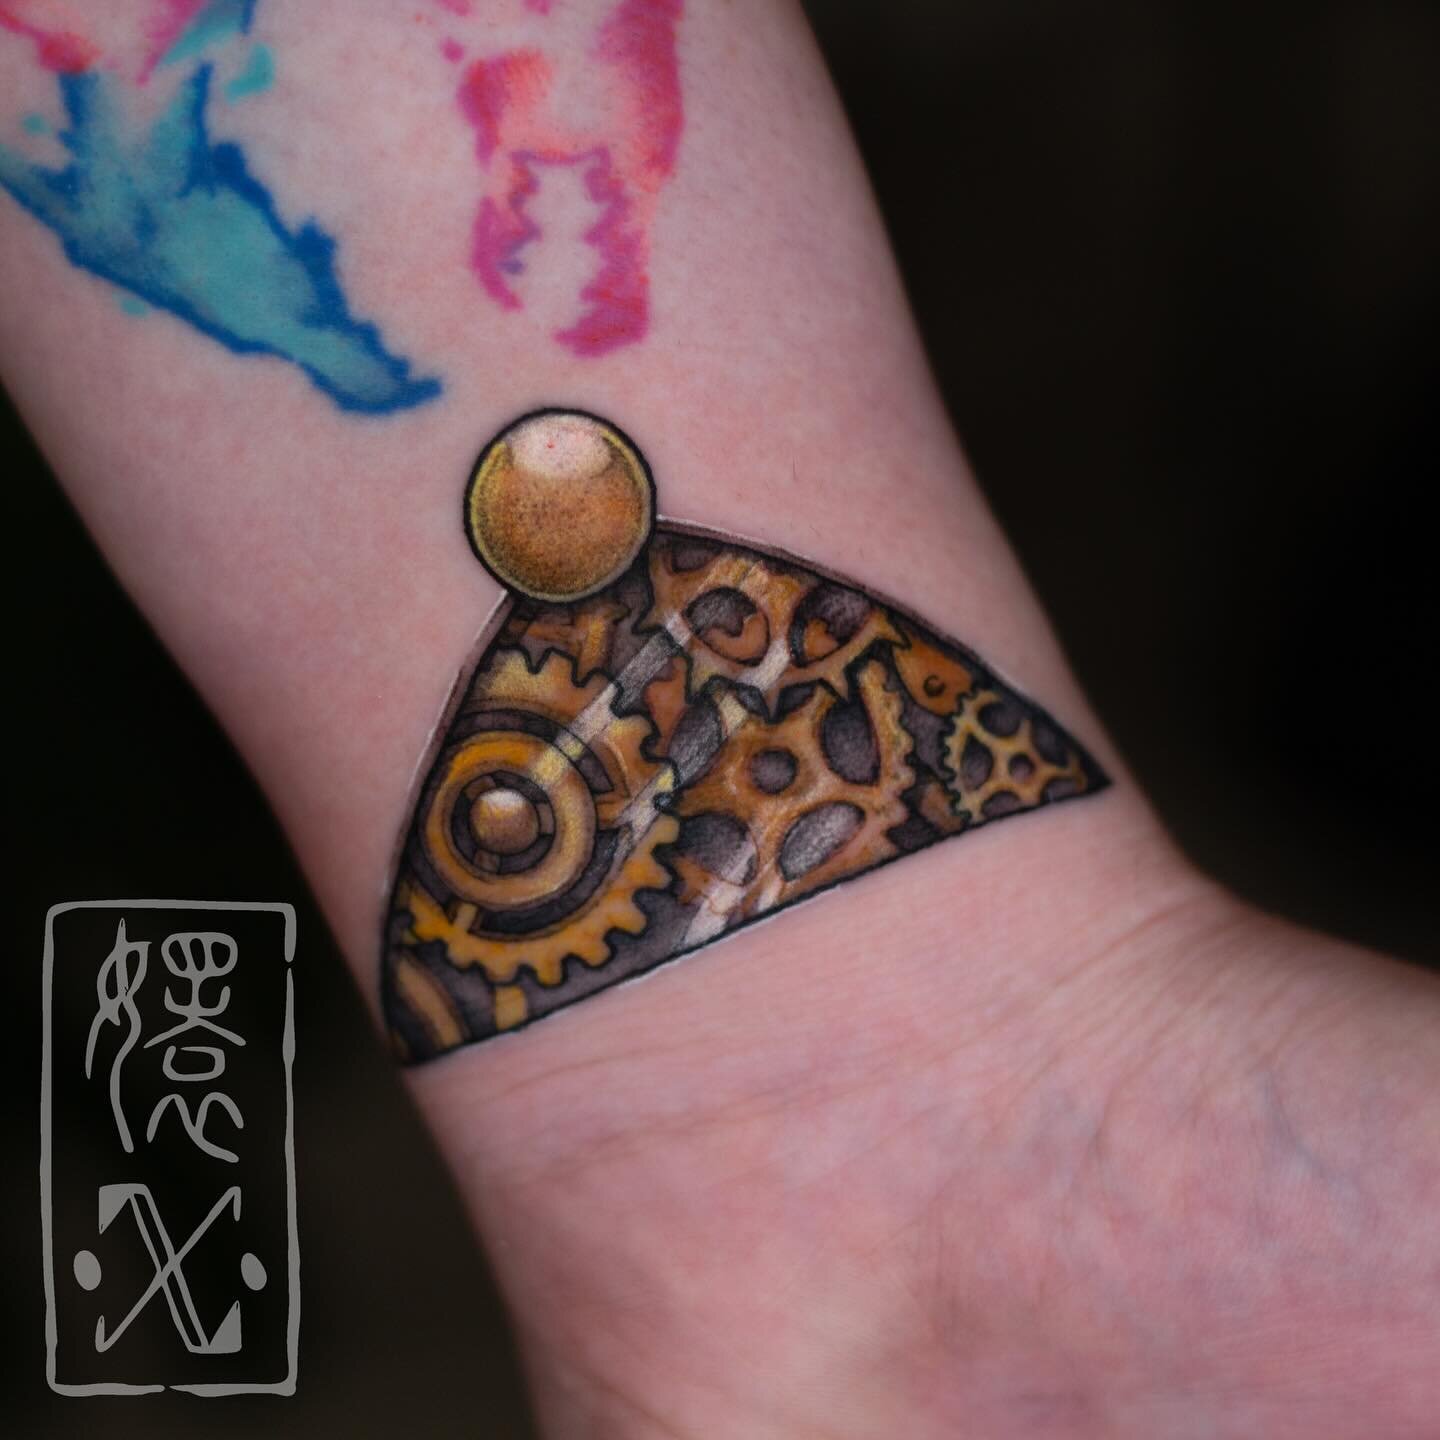 A mechanist gear wrist piece for Kira based on her character, Zithiel (Zi). Swipe to see the art work i based this design on! Thank you for trusting me and traveling to NY and getting this tattoo 🥹🥹🥹

I recently started DnD for the first time (bes